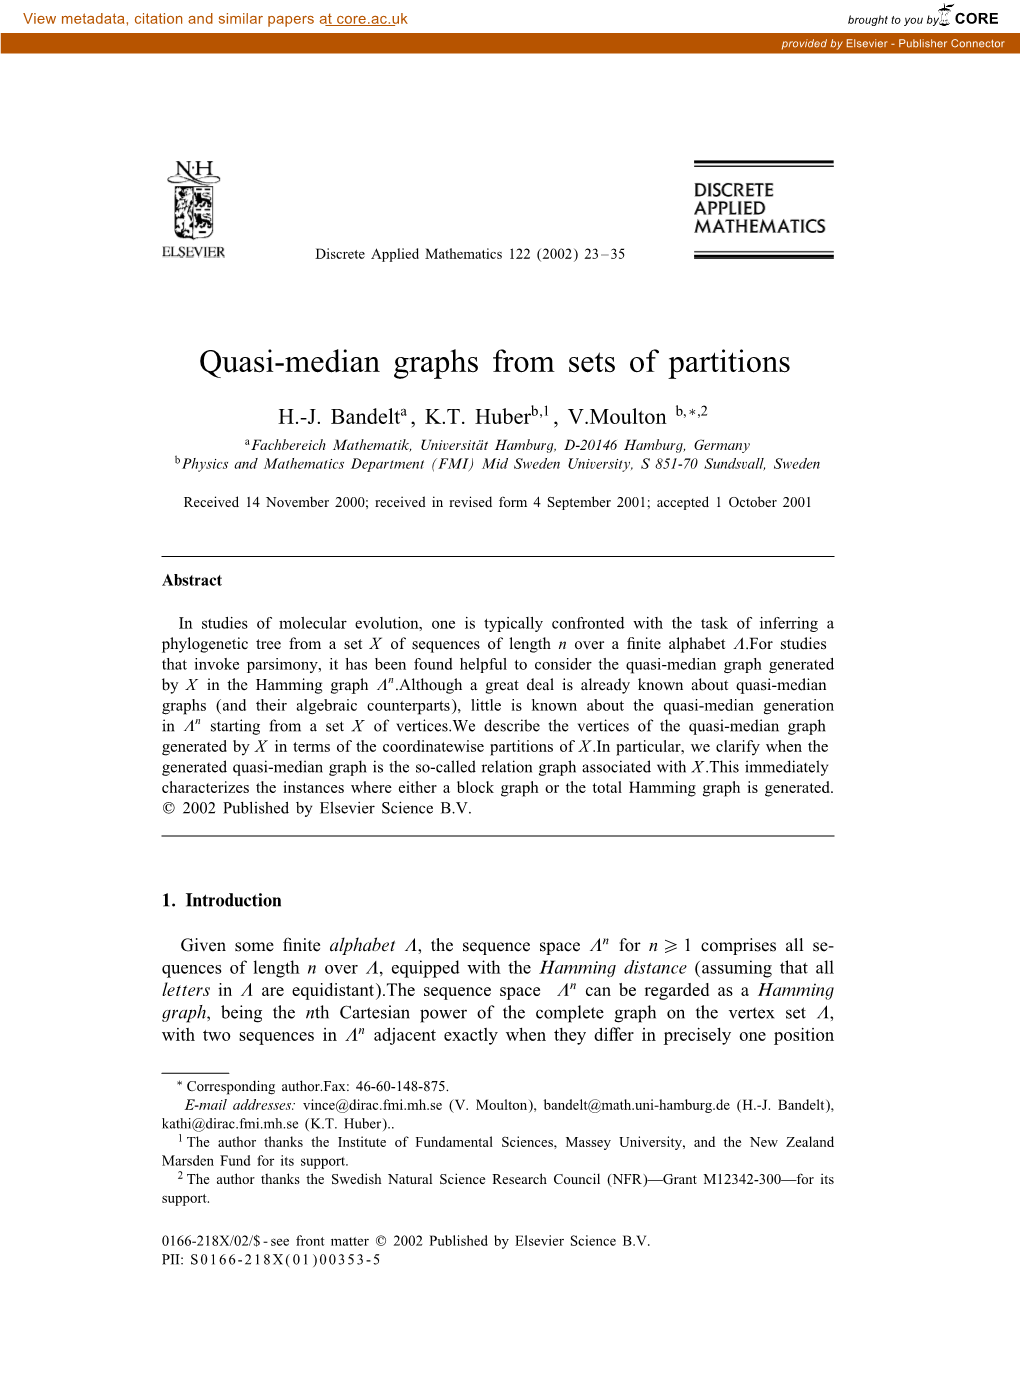 Quasi-Median Graphs from Sets of Partitions